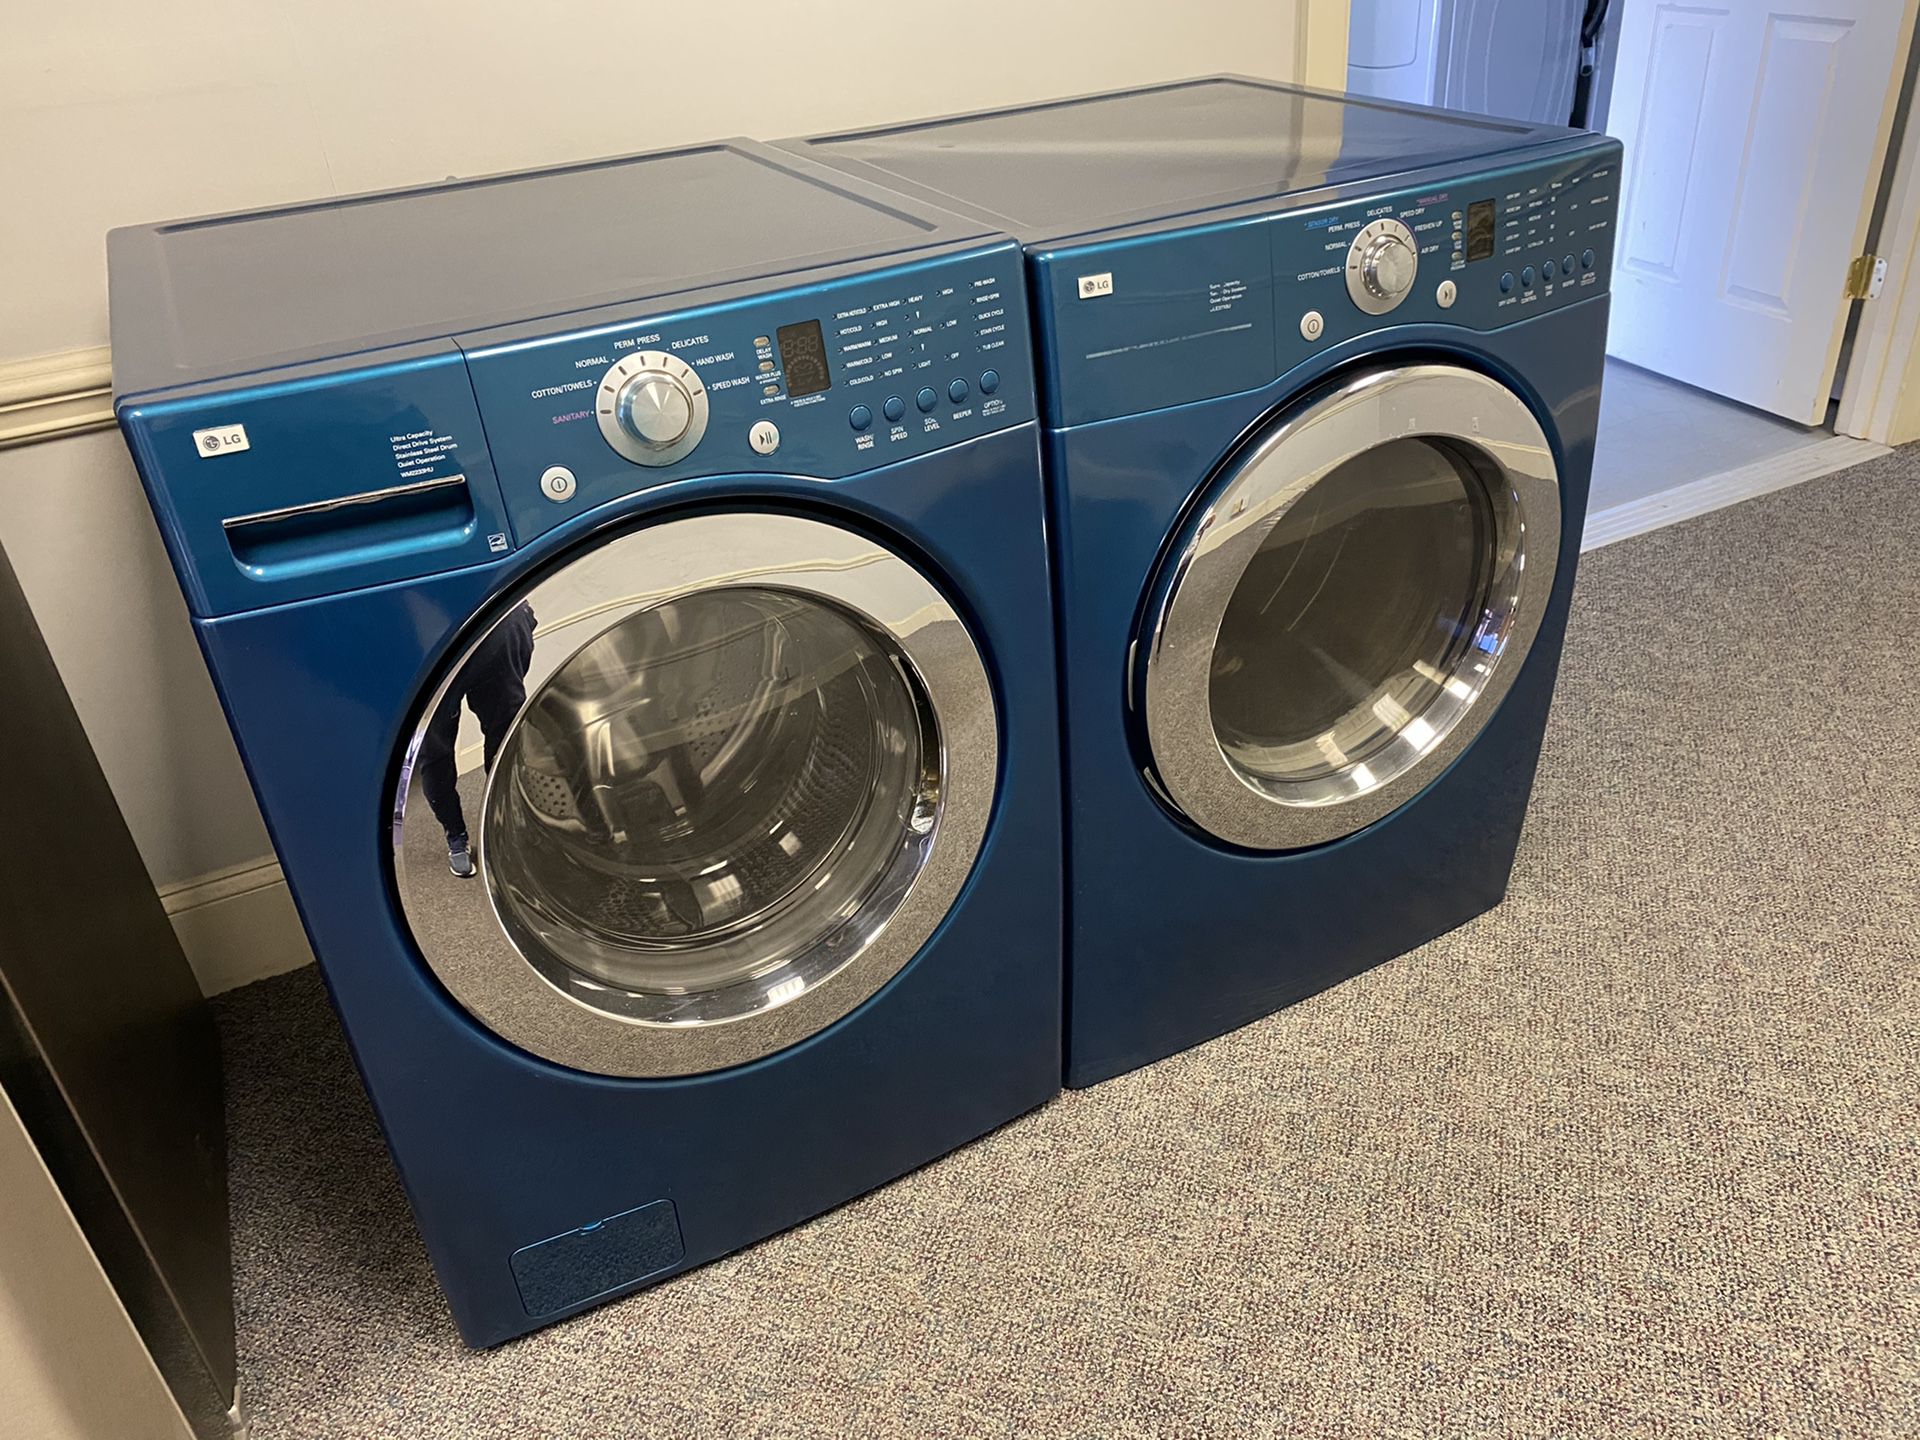 TEAL LG HIGH EFFICIENCY FRONT LOAD WASHER AND DRYER SET 4 month warranty